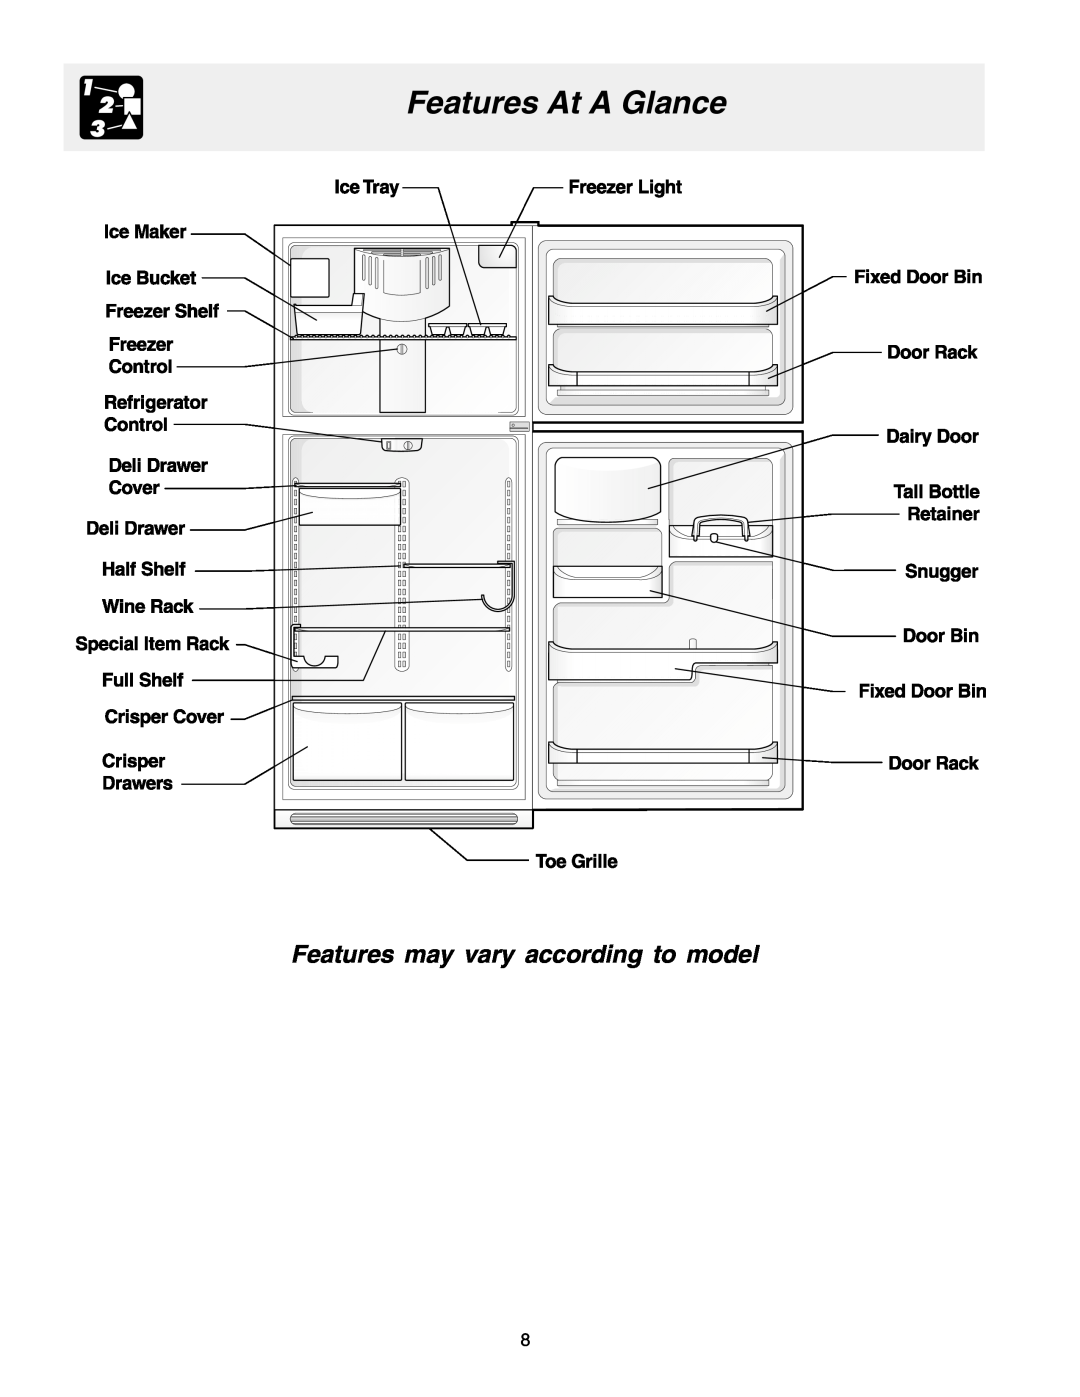 Frigidaire Frigidaire manual Features At A Glance, Features may vary according to model 